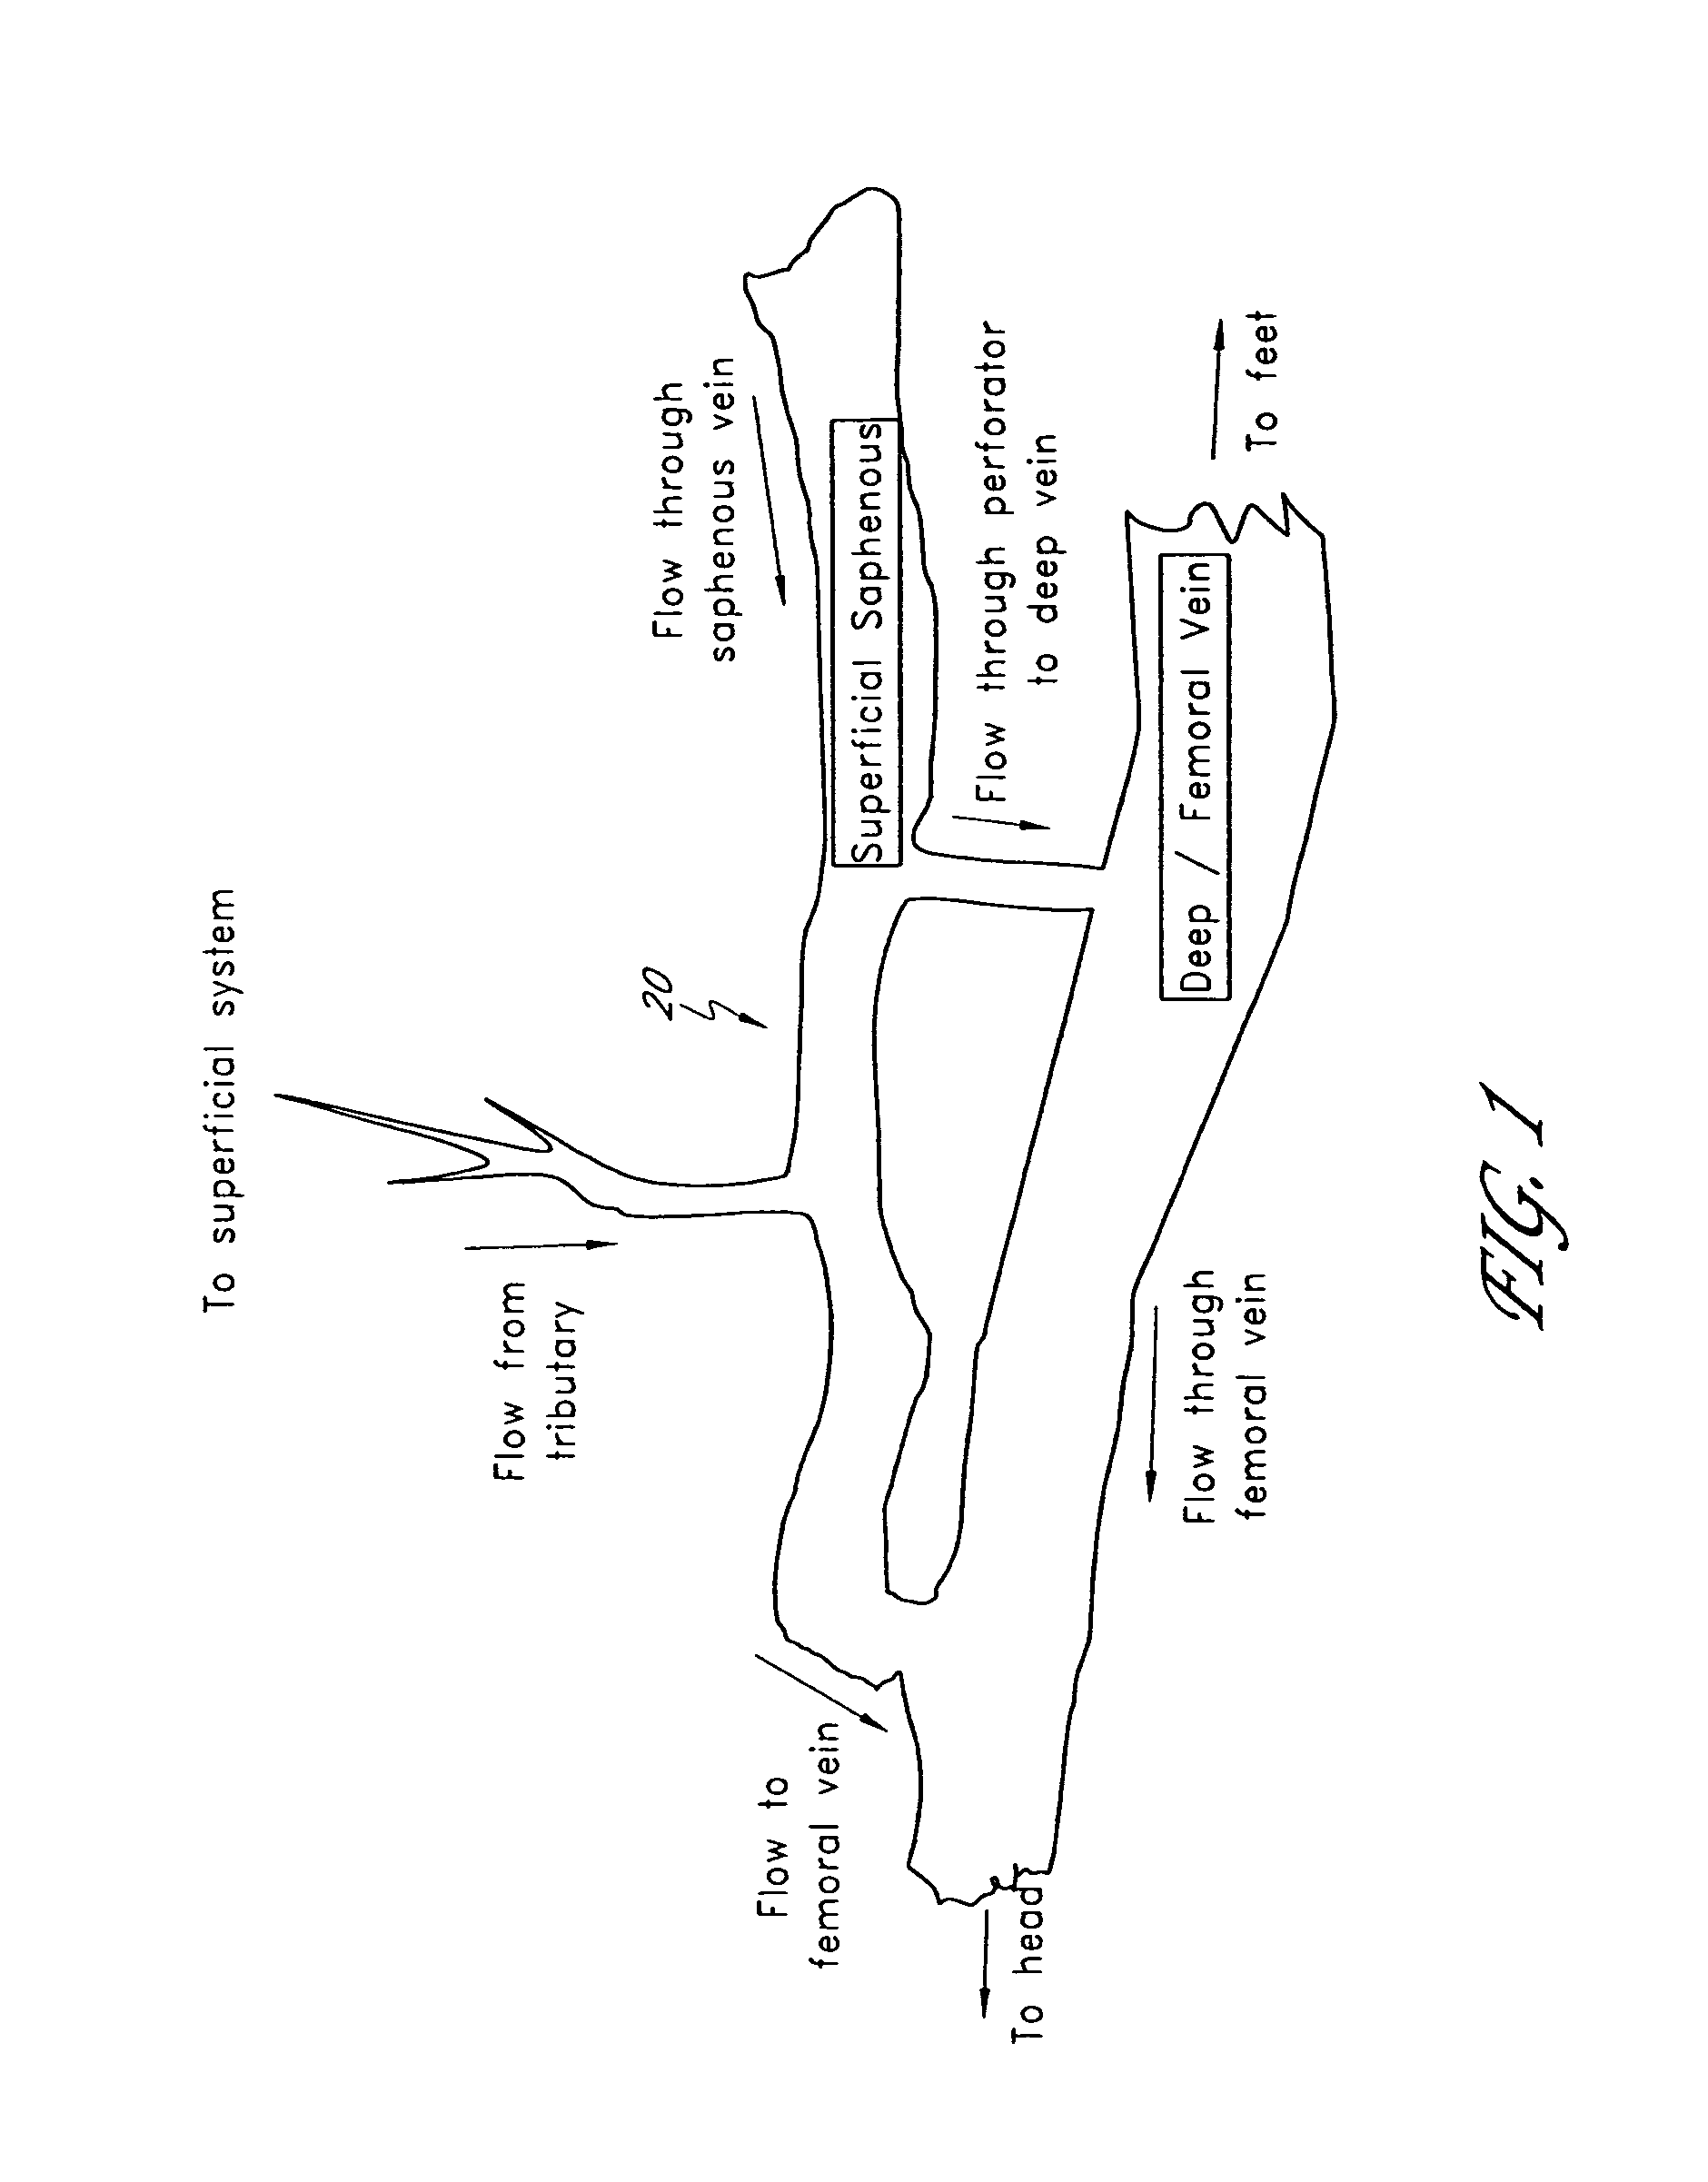 Occlusive implant and methods for hollow anatomical structure